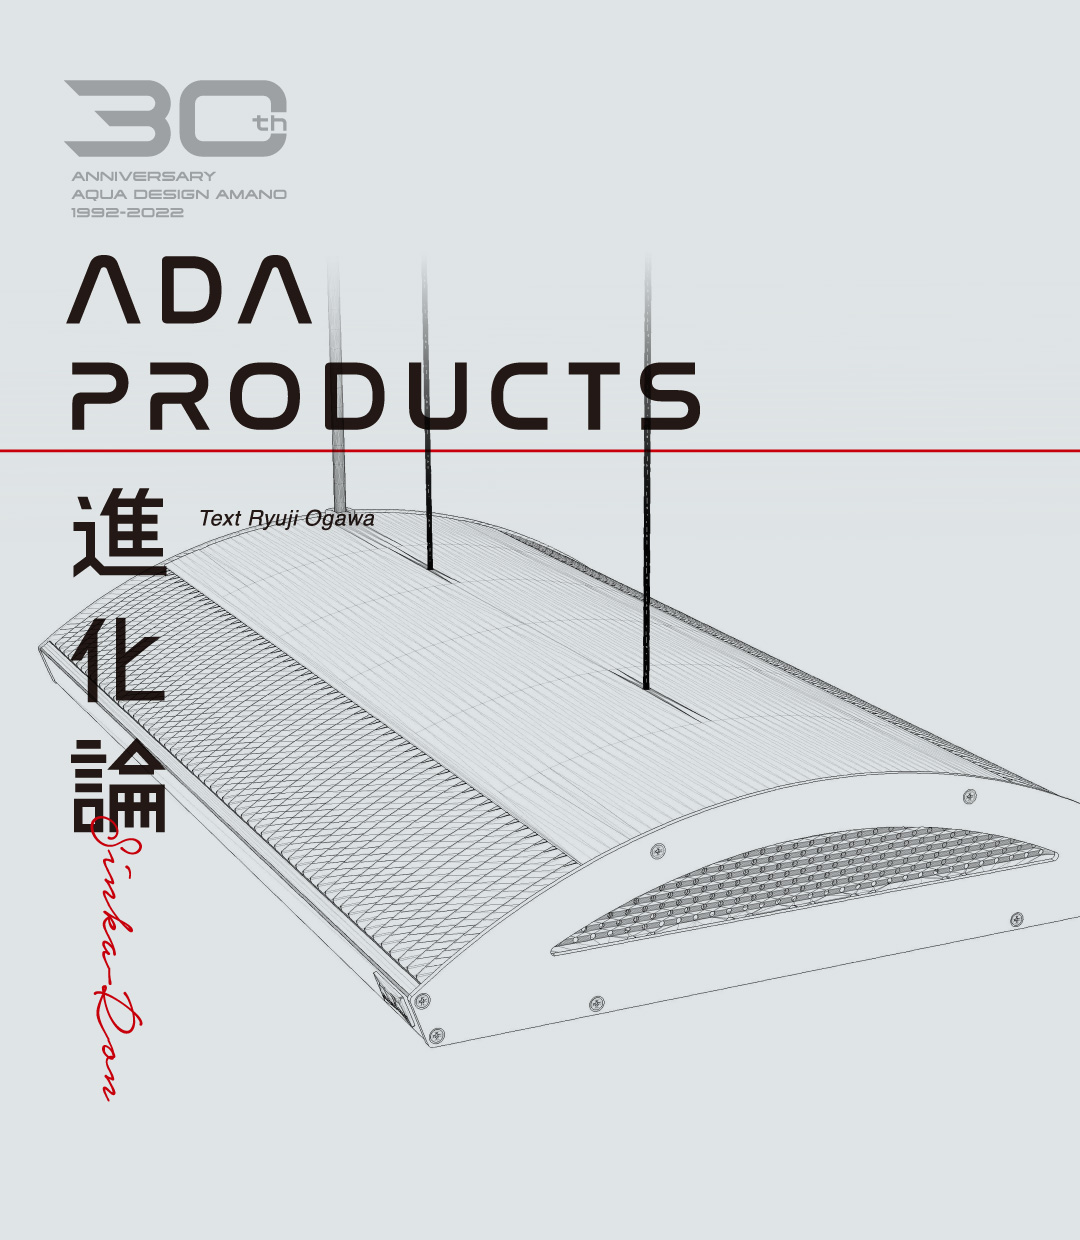 ADA PRODUCTS -The theory of evolution- #7. LIGHTING SYSTEM